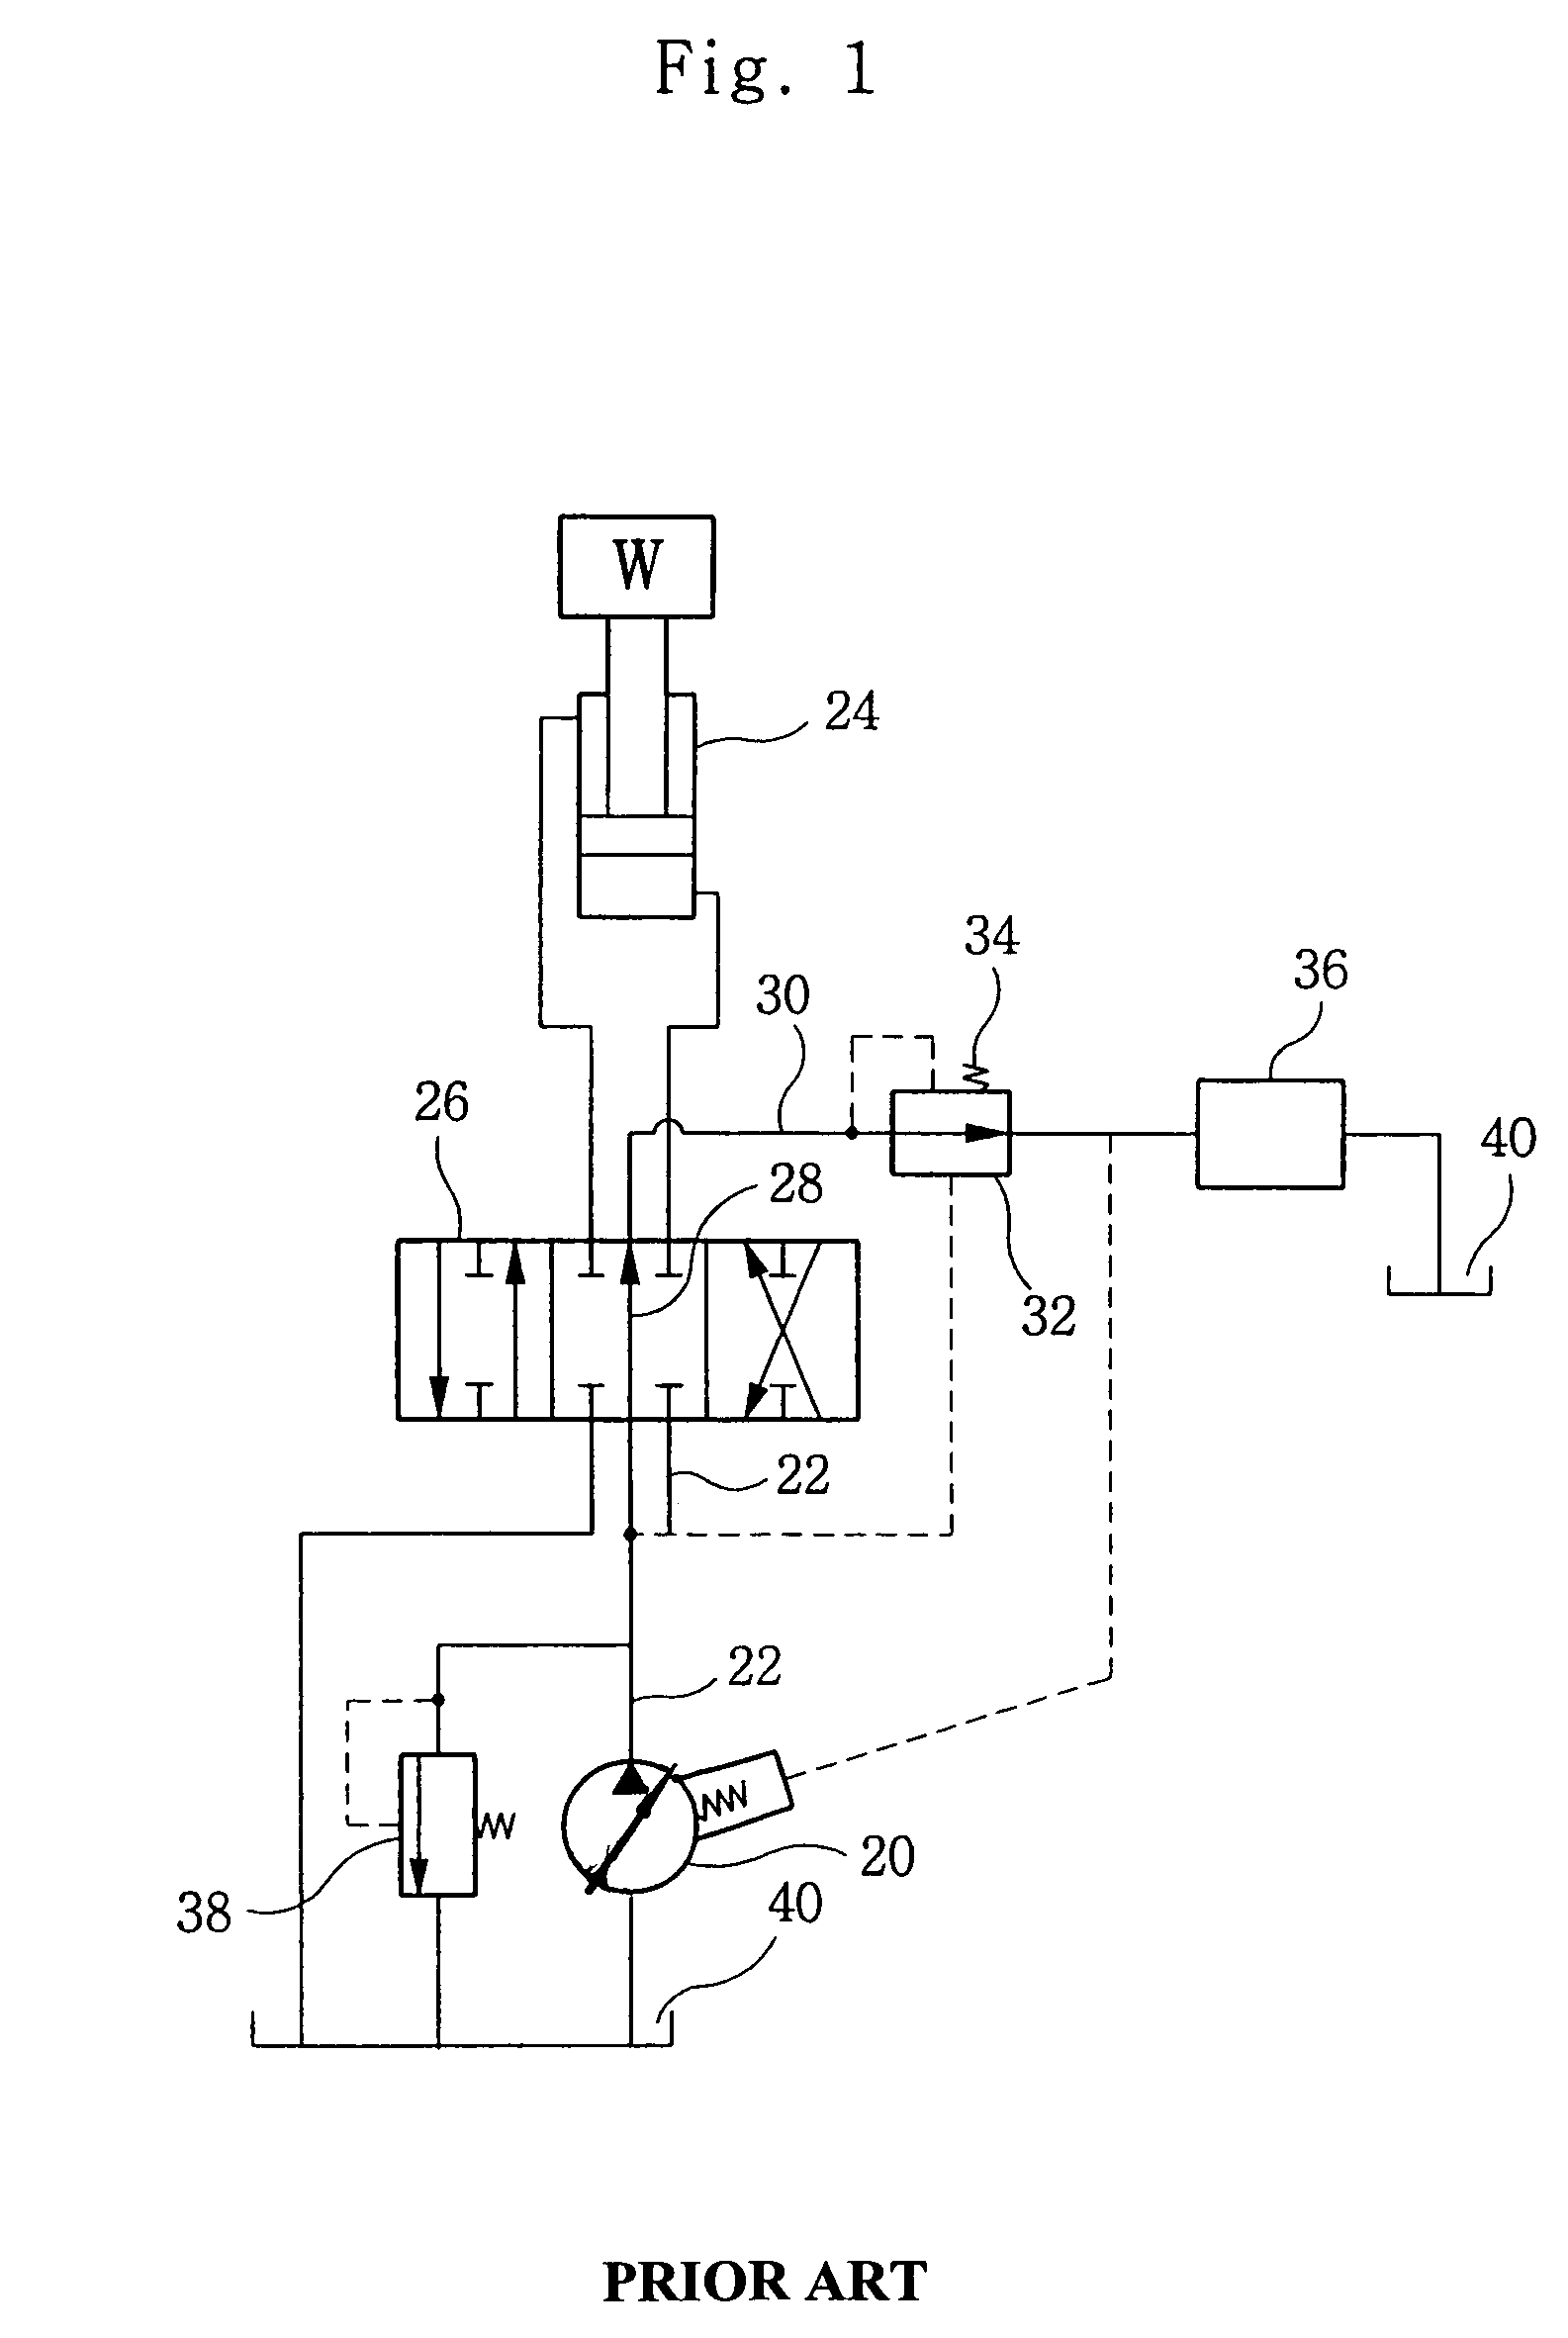 Circuit for controlling discharge amount of hydraulic pump